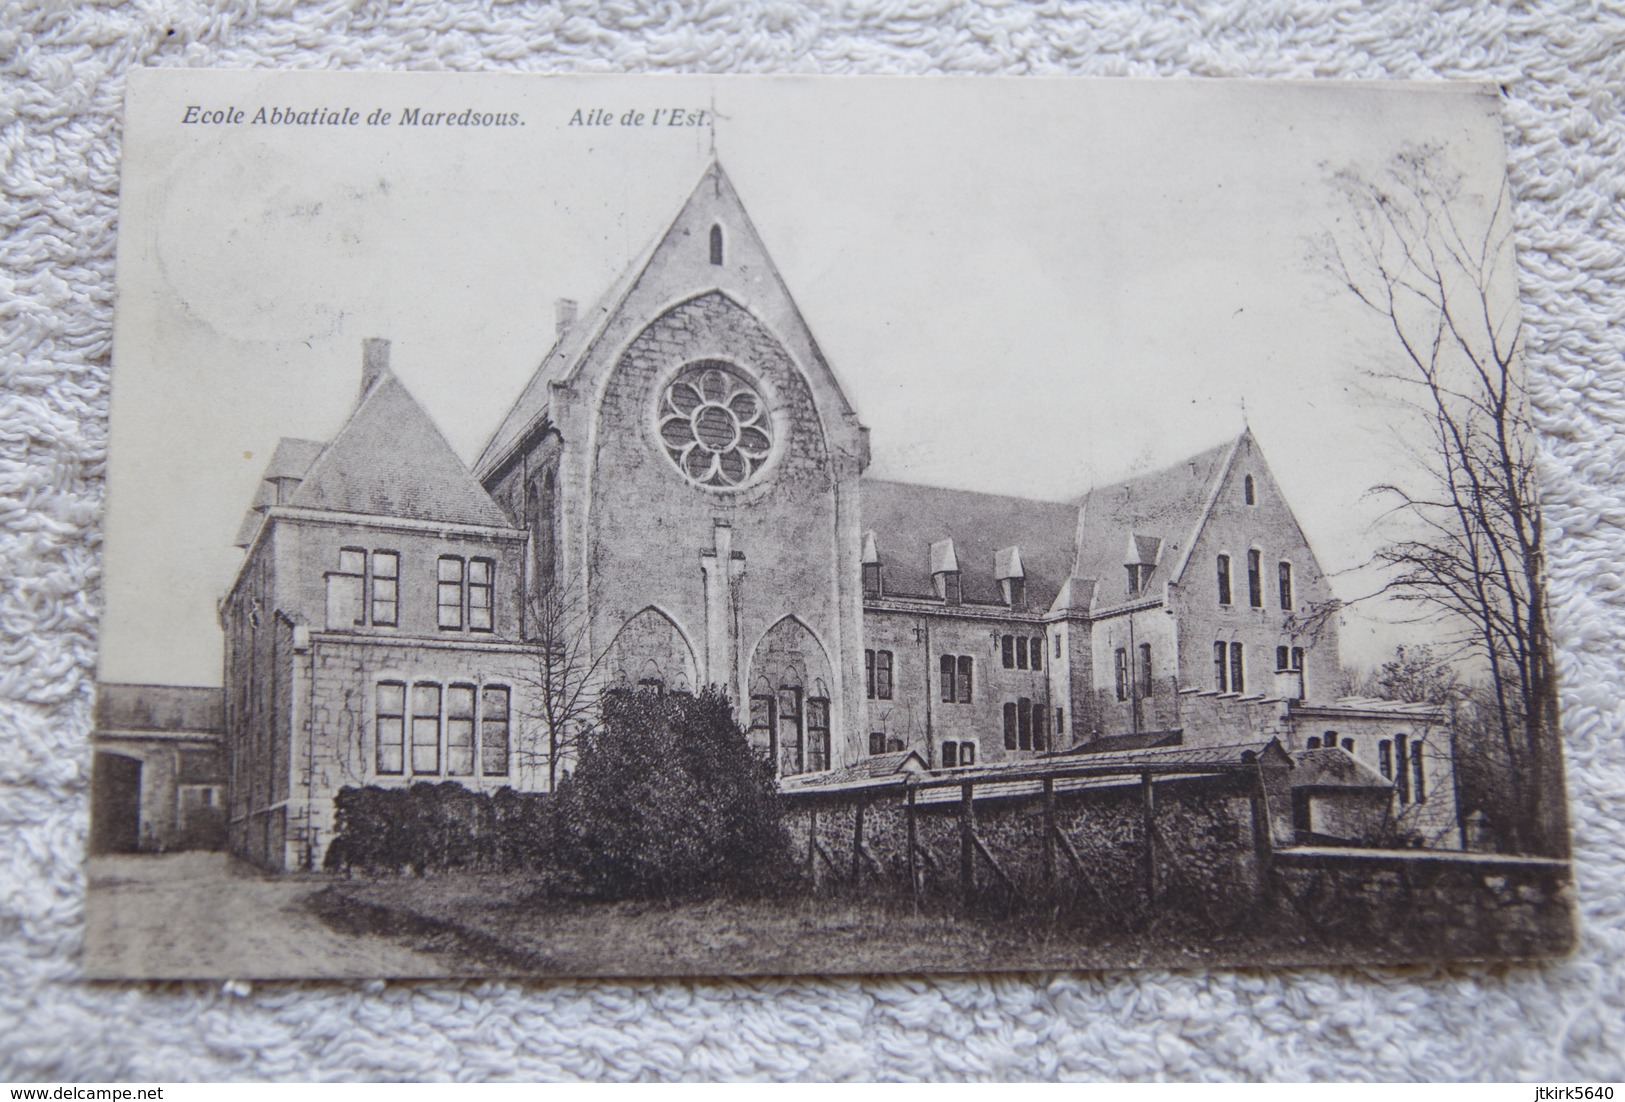 Maredsous "Ecole Abbatiale" - Anhee